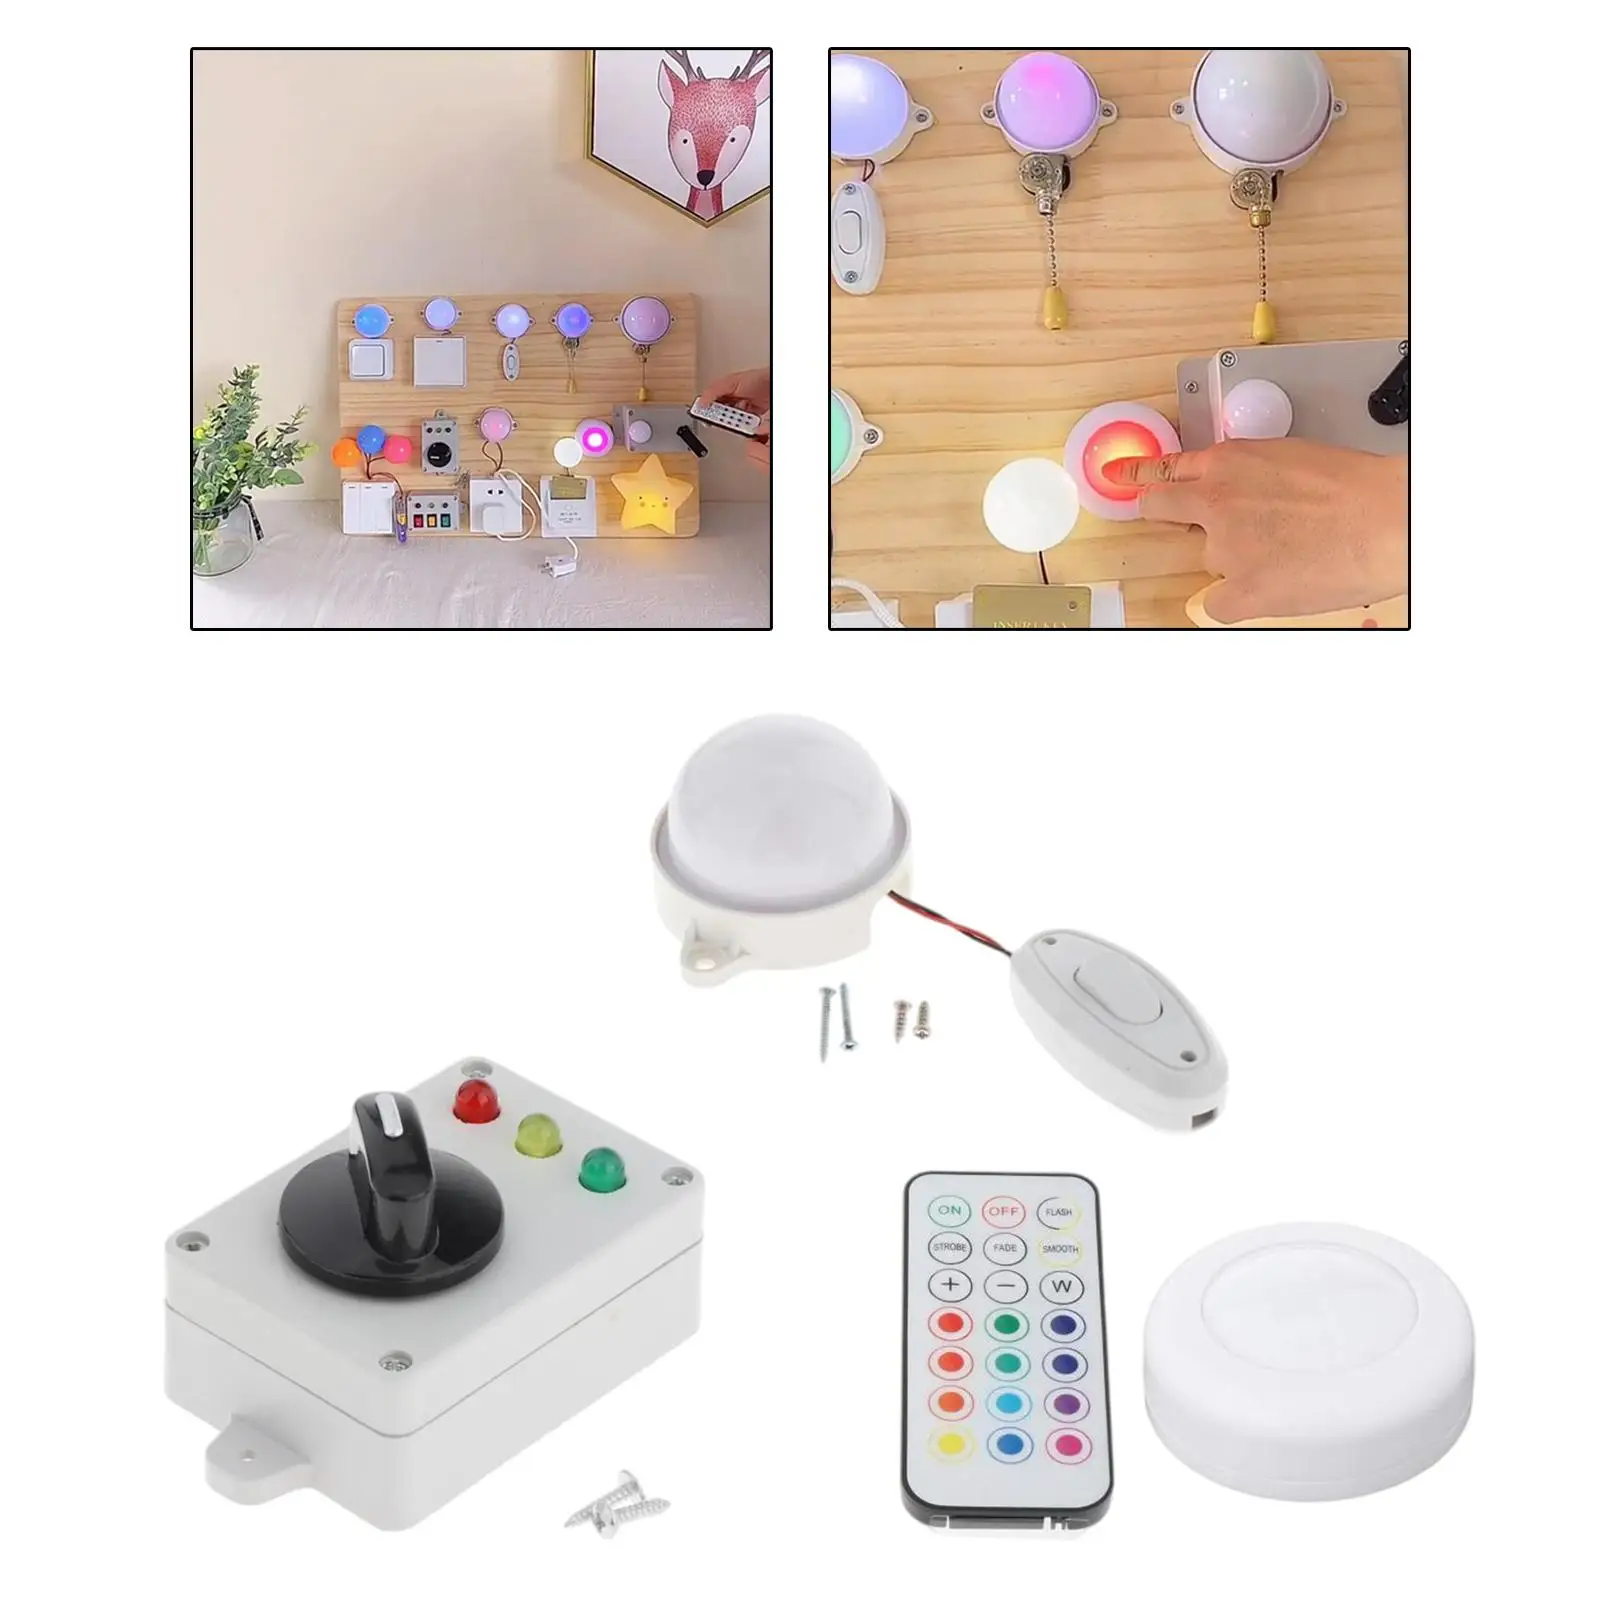 3 pcs Electrical 3-Color Light,Switch Light,Remote Clap Light DIY Busy Board Accessory for Age 3+